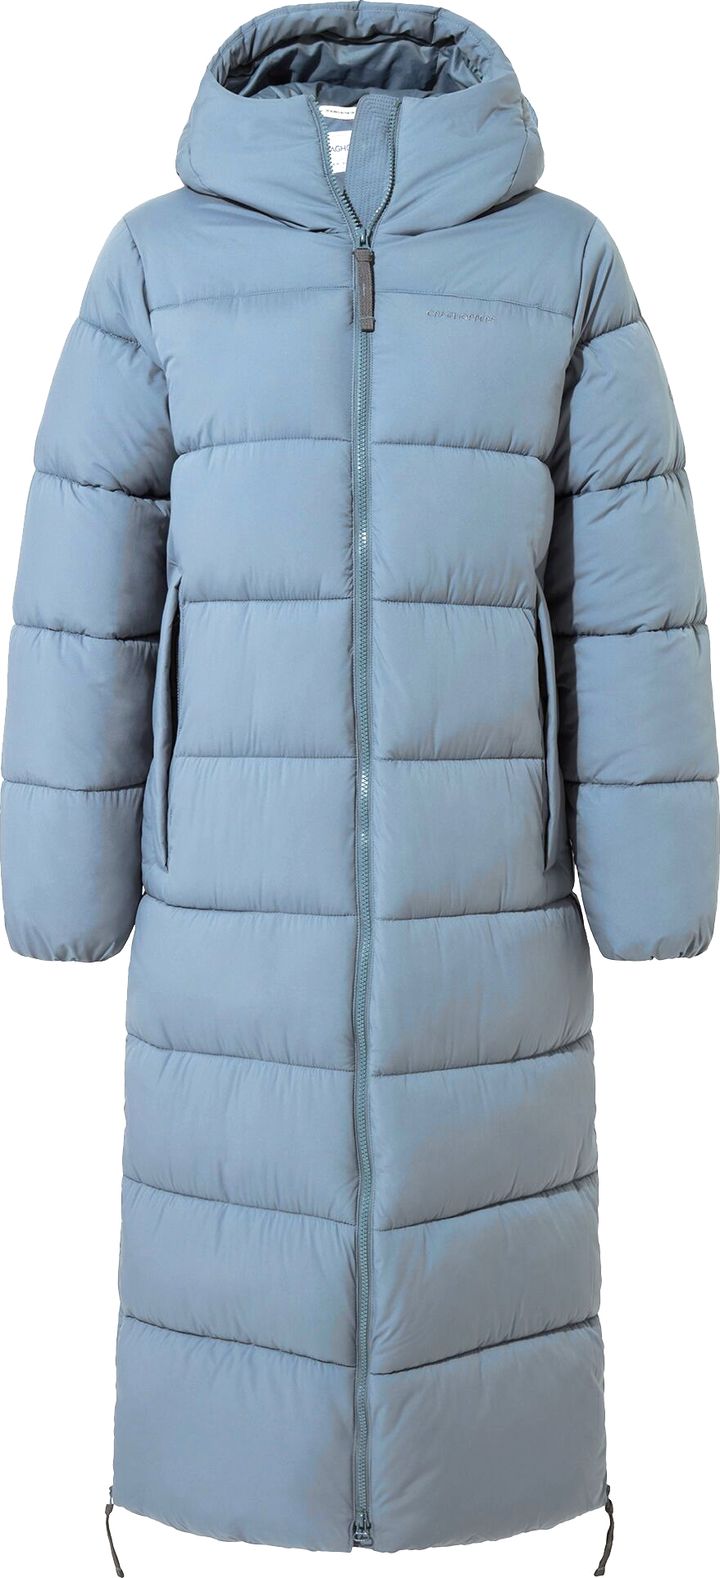 https://www.fjellsport.no/assets/blobs/craghoppers-women-s-narlia-insluated-hooded-jacket-winter-sky-b298afb898.png?preset=tiny&dpr=2